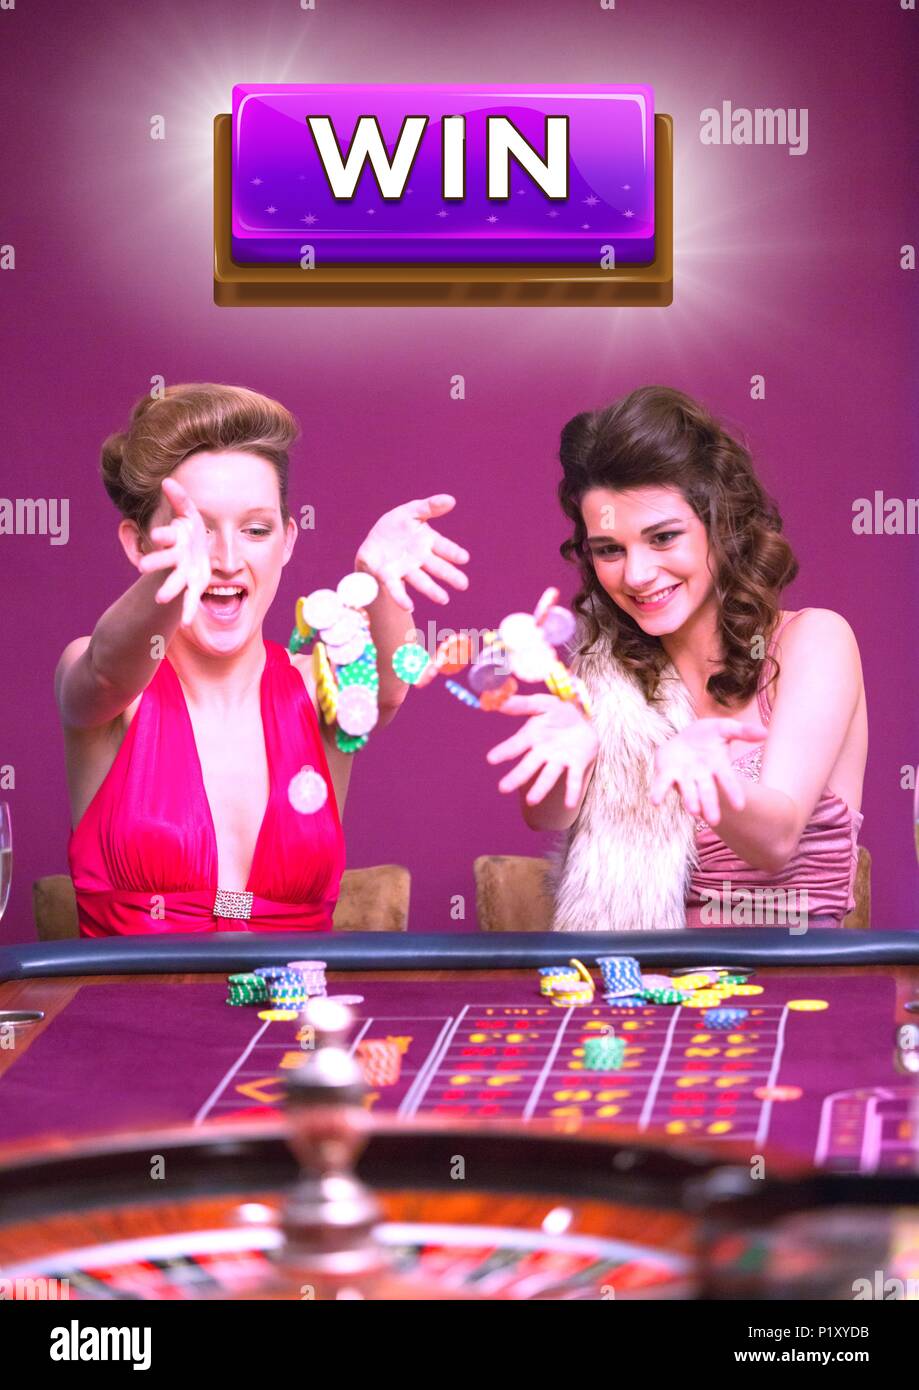 Win button with two women playing in casino Stock Photo